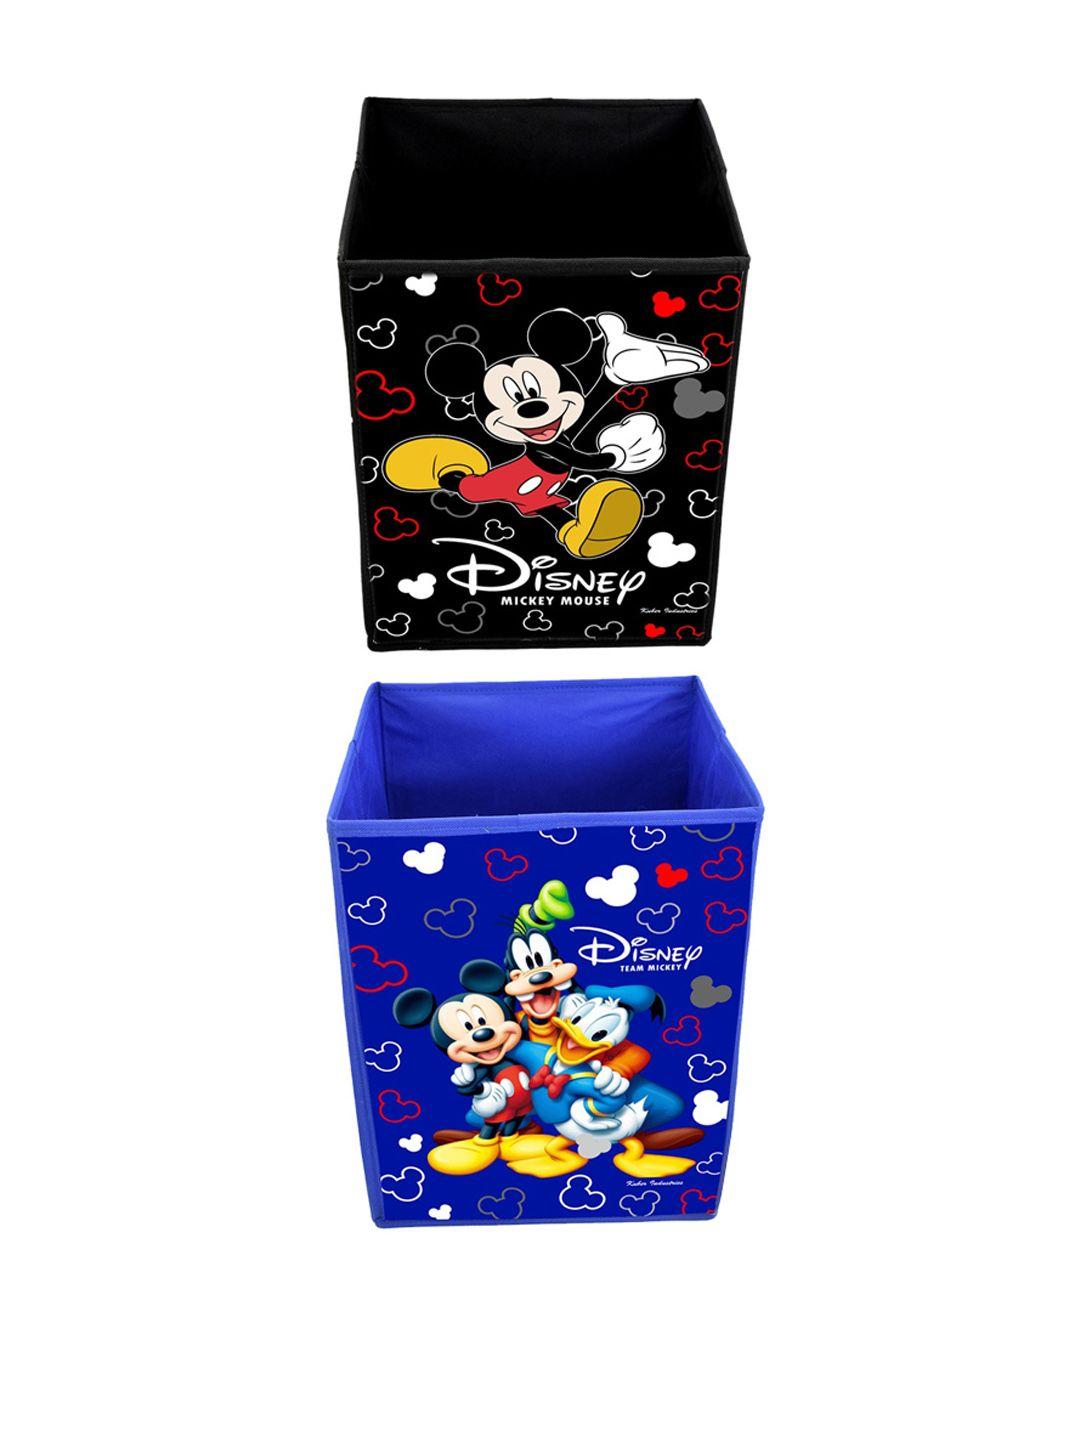 kuber industries set of 2 printed disney mickey mouse multi-utility storage baskets with handles